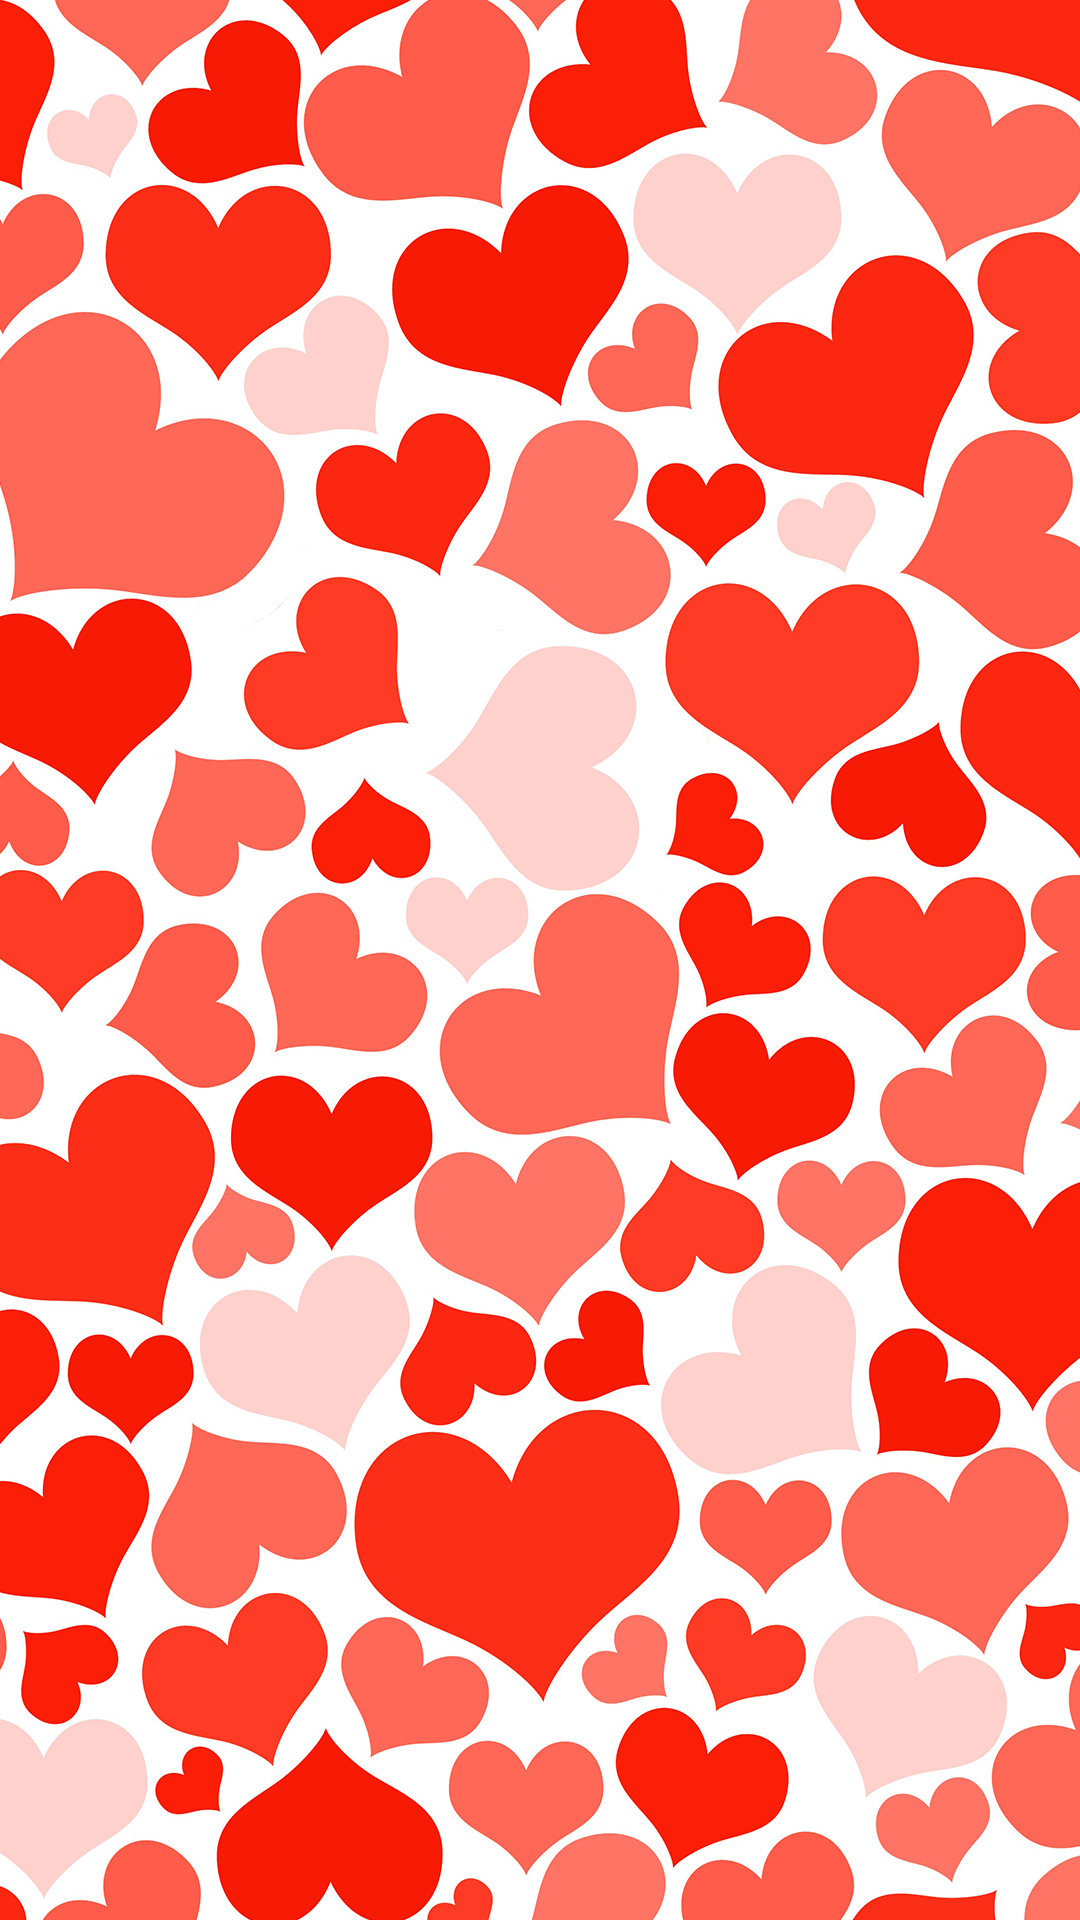 Love Hearts Wallpaper HD It's My Name Day